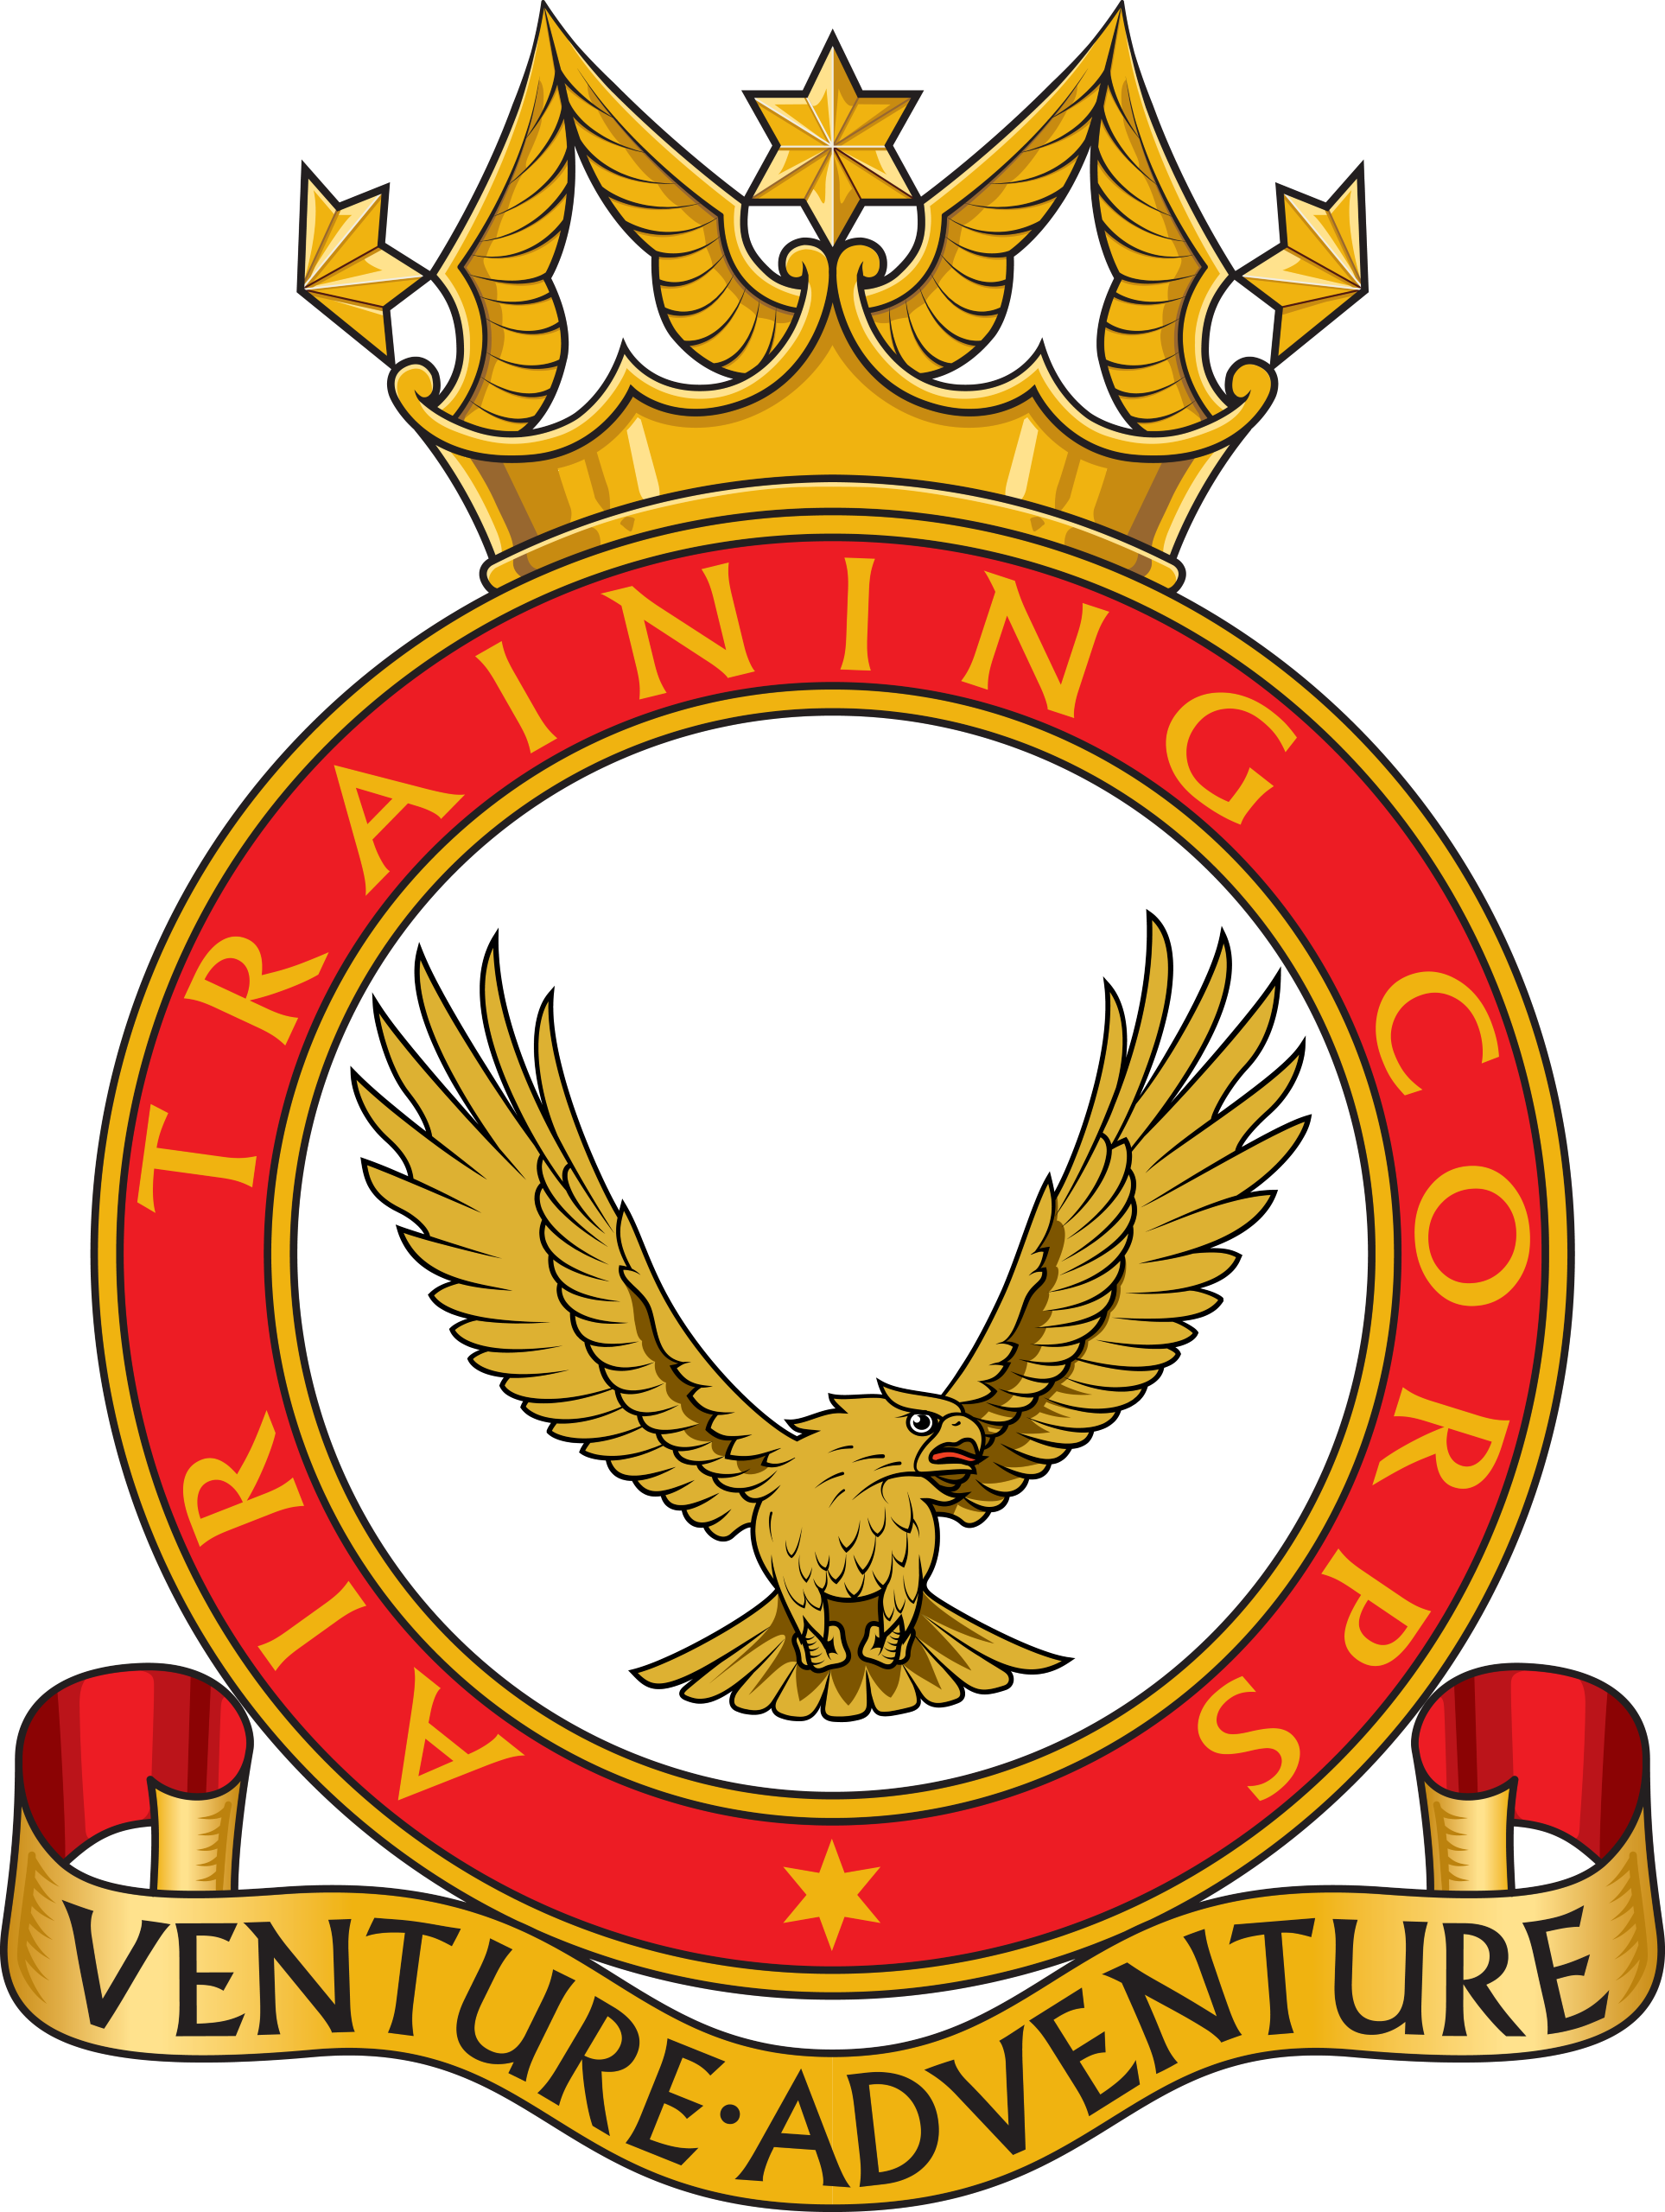 Air Training Corps crest